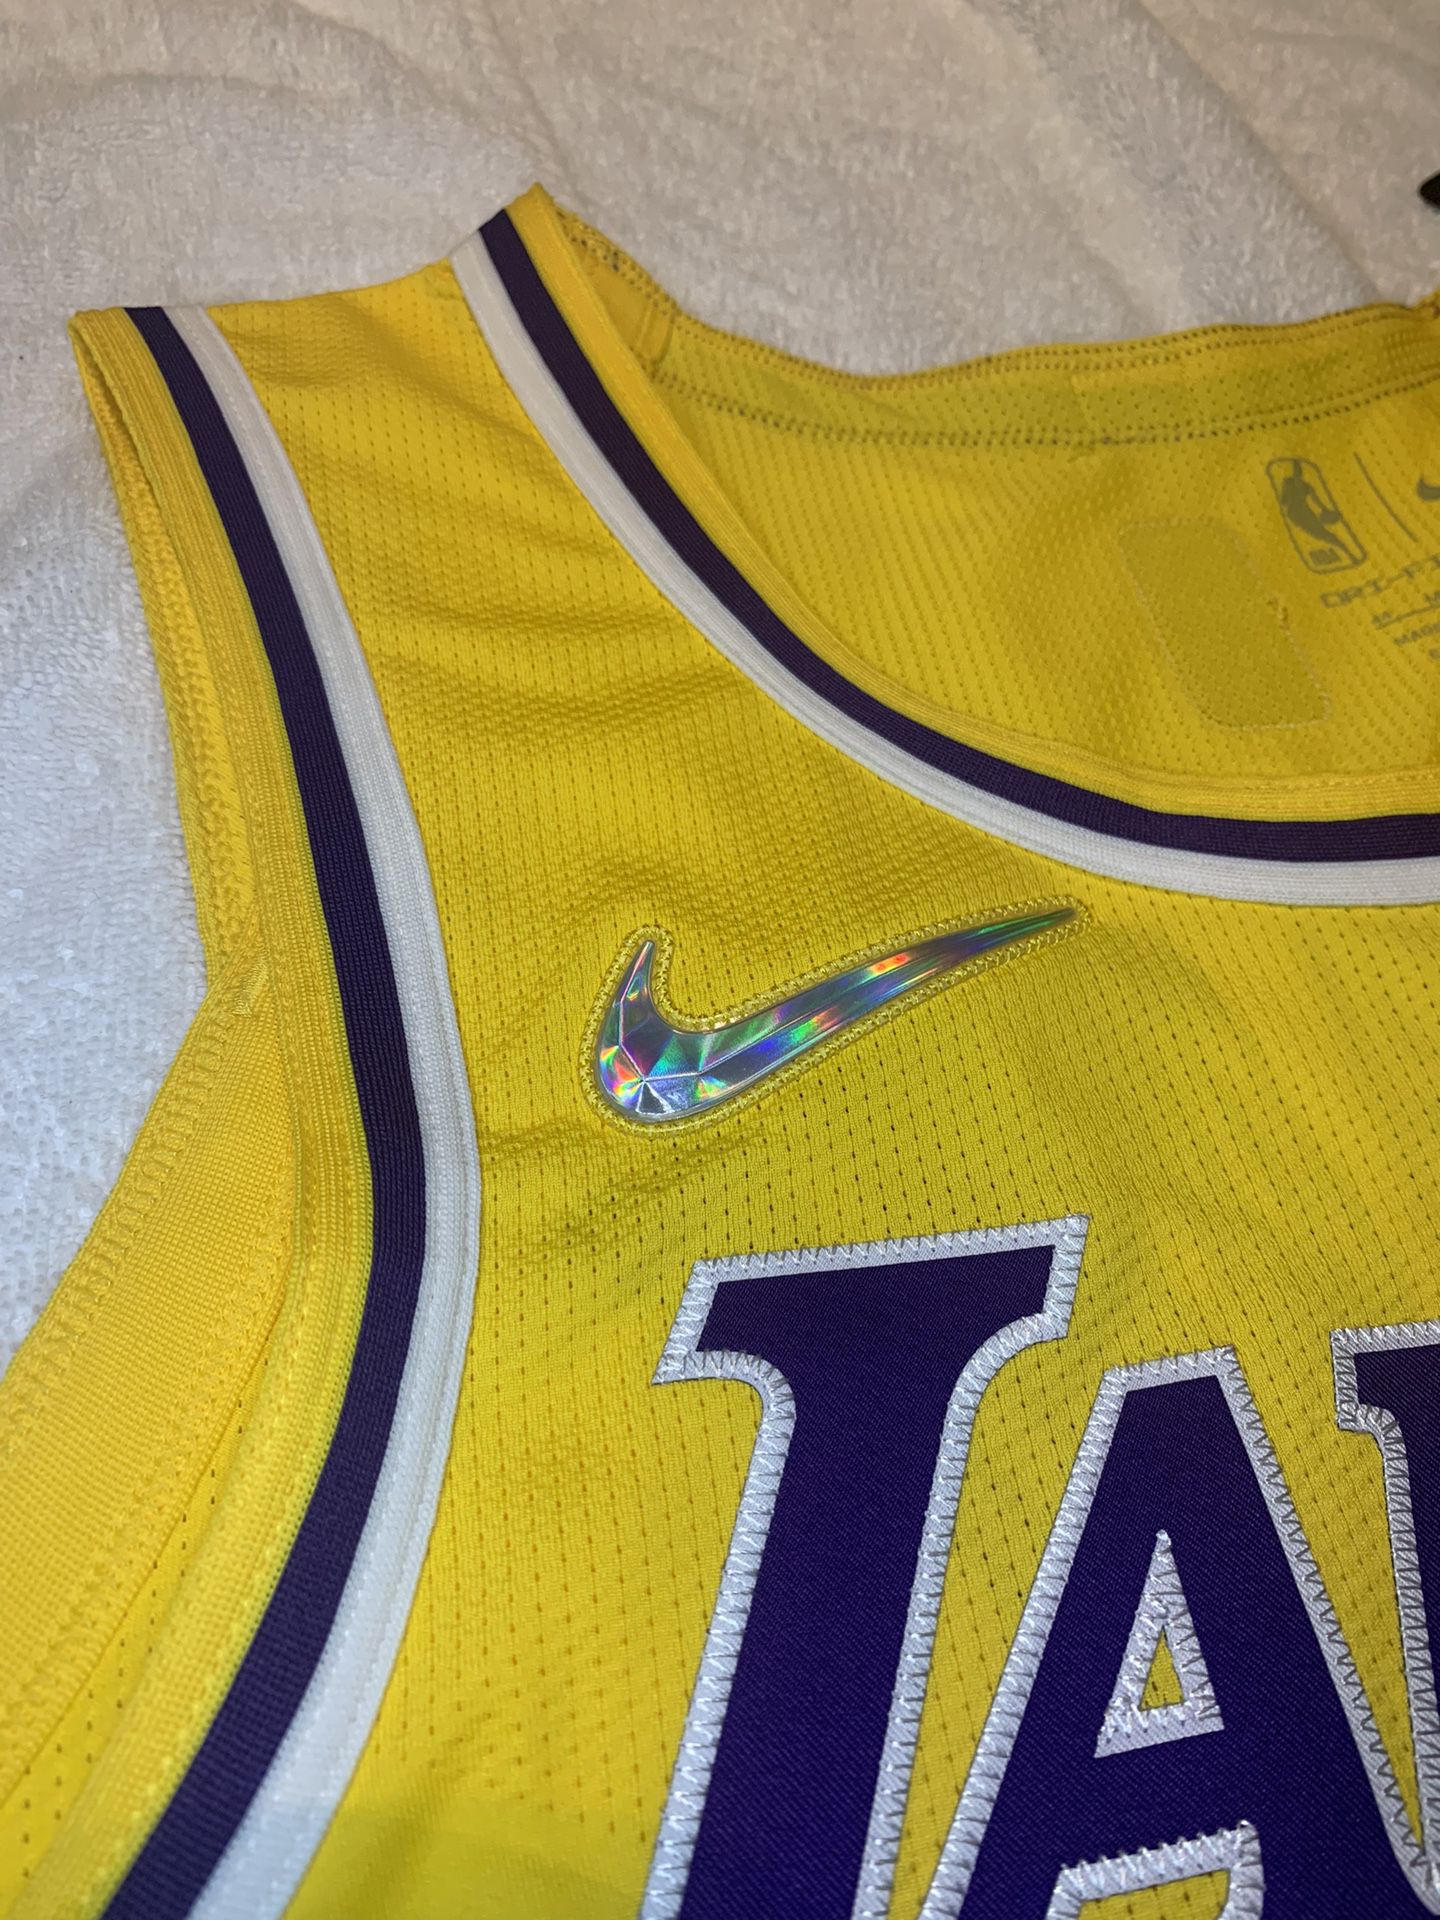 100 percent authentic Carmelo Anthony Lakers Nike Nigeria